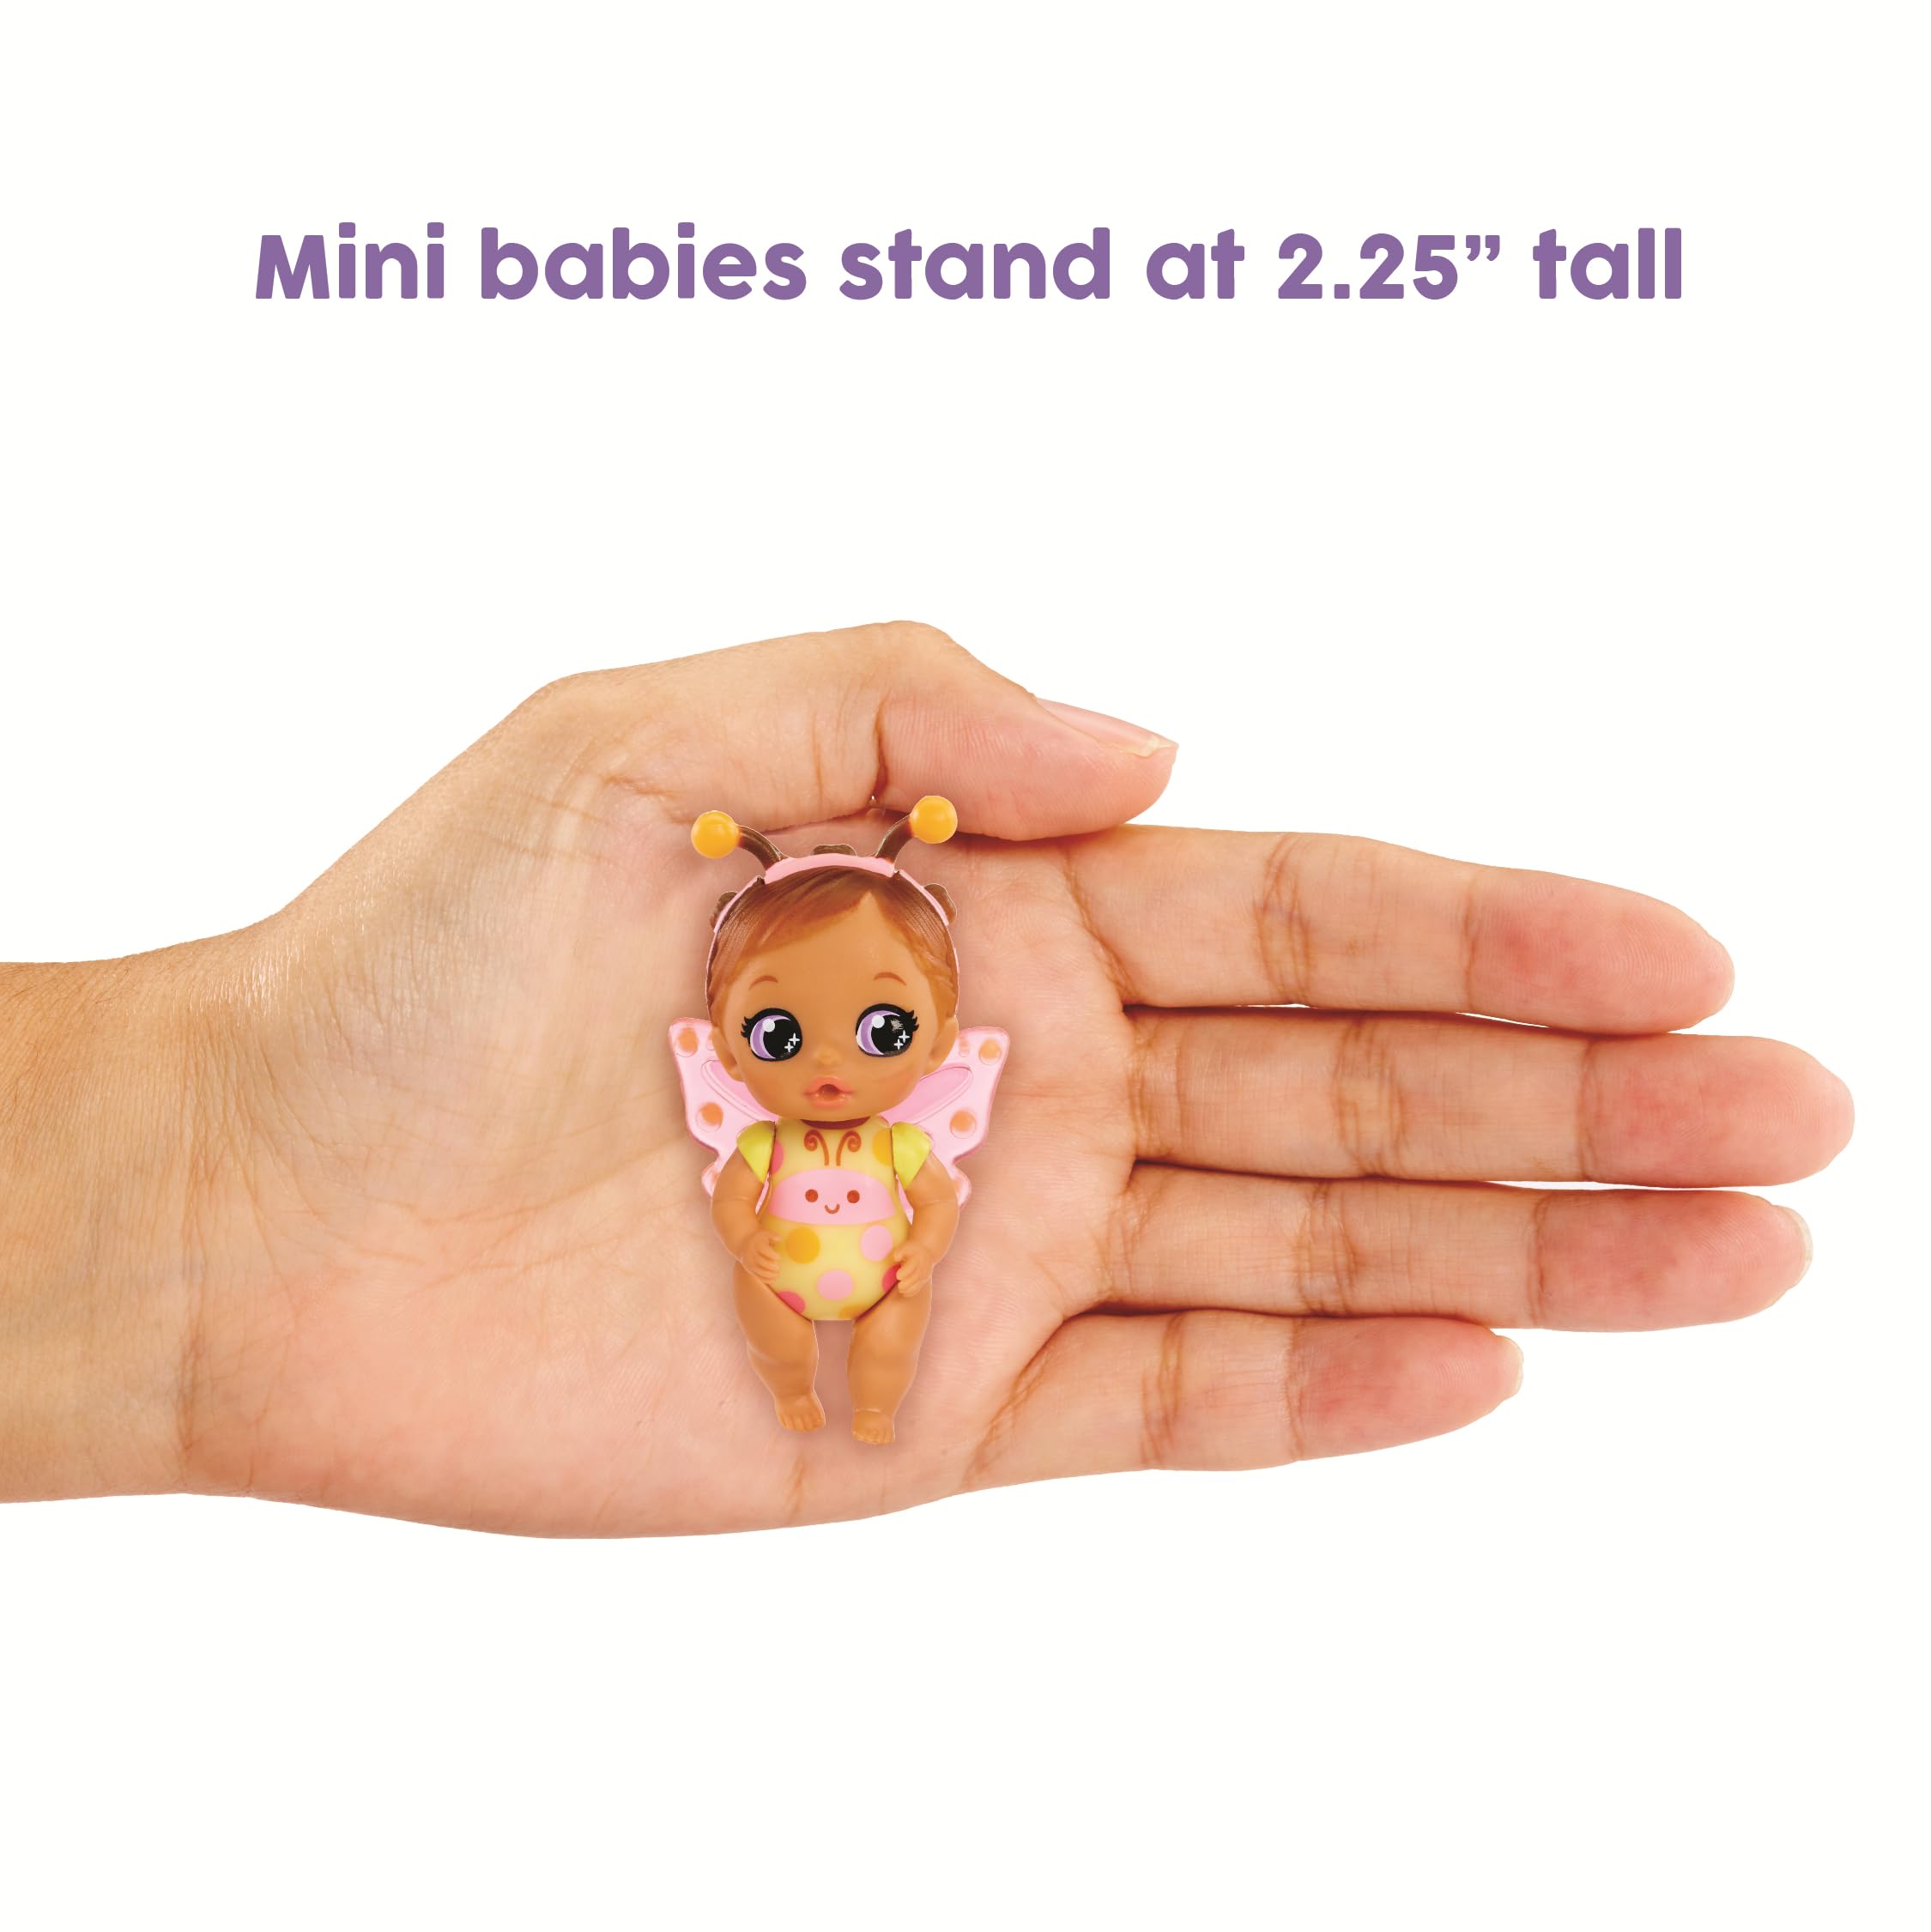 Baby Born Surprise Mini Babies Series 1 3 Pack - Unwrap Surprise Collectible Baby Doll, Butterfly or Mermaid Theme, for Kids Ages 3 and Up